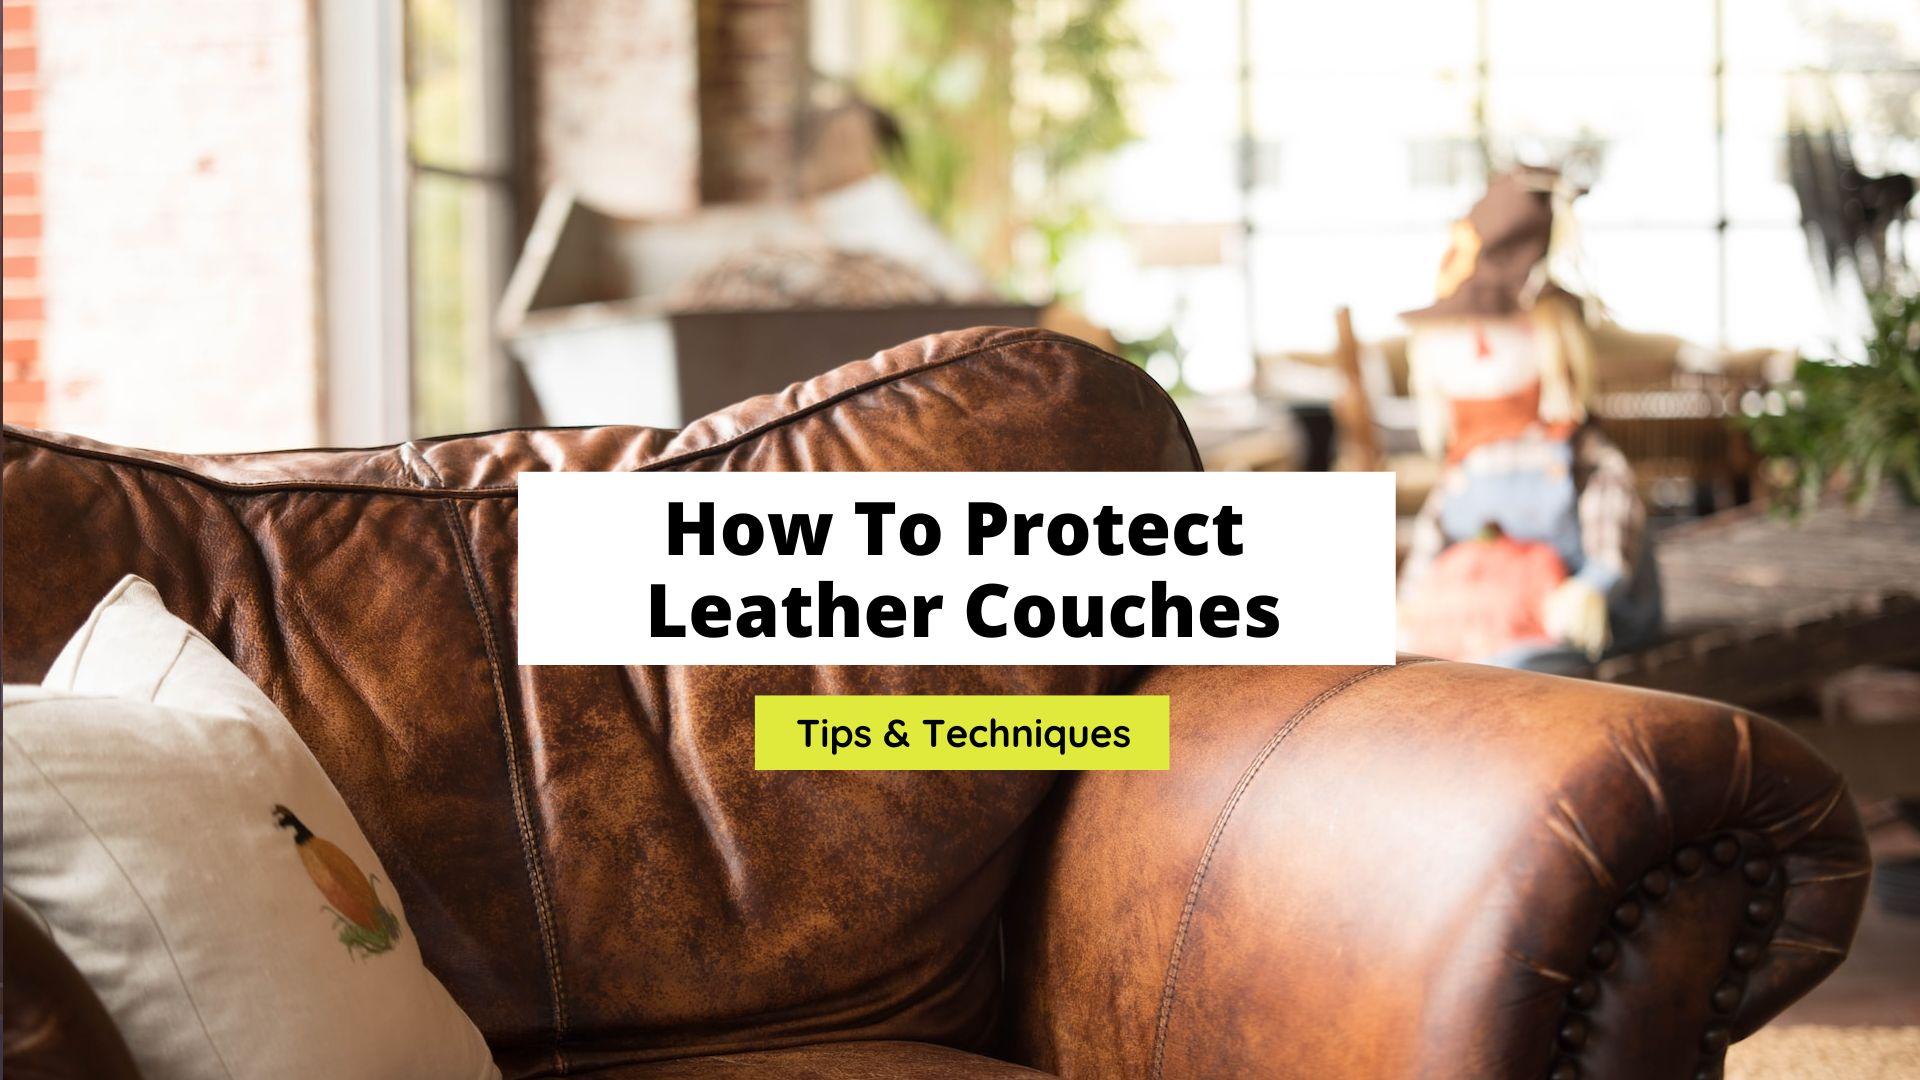 How To Protect Leather Couches